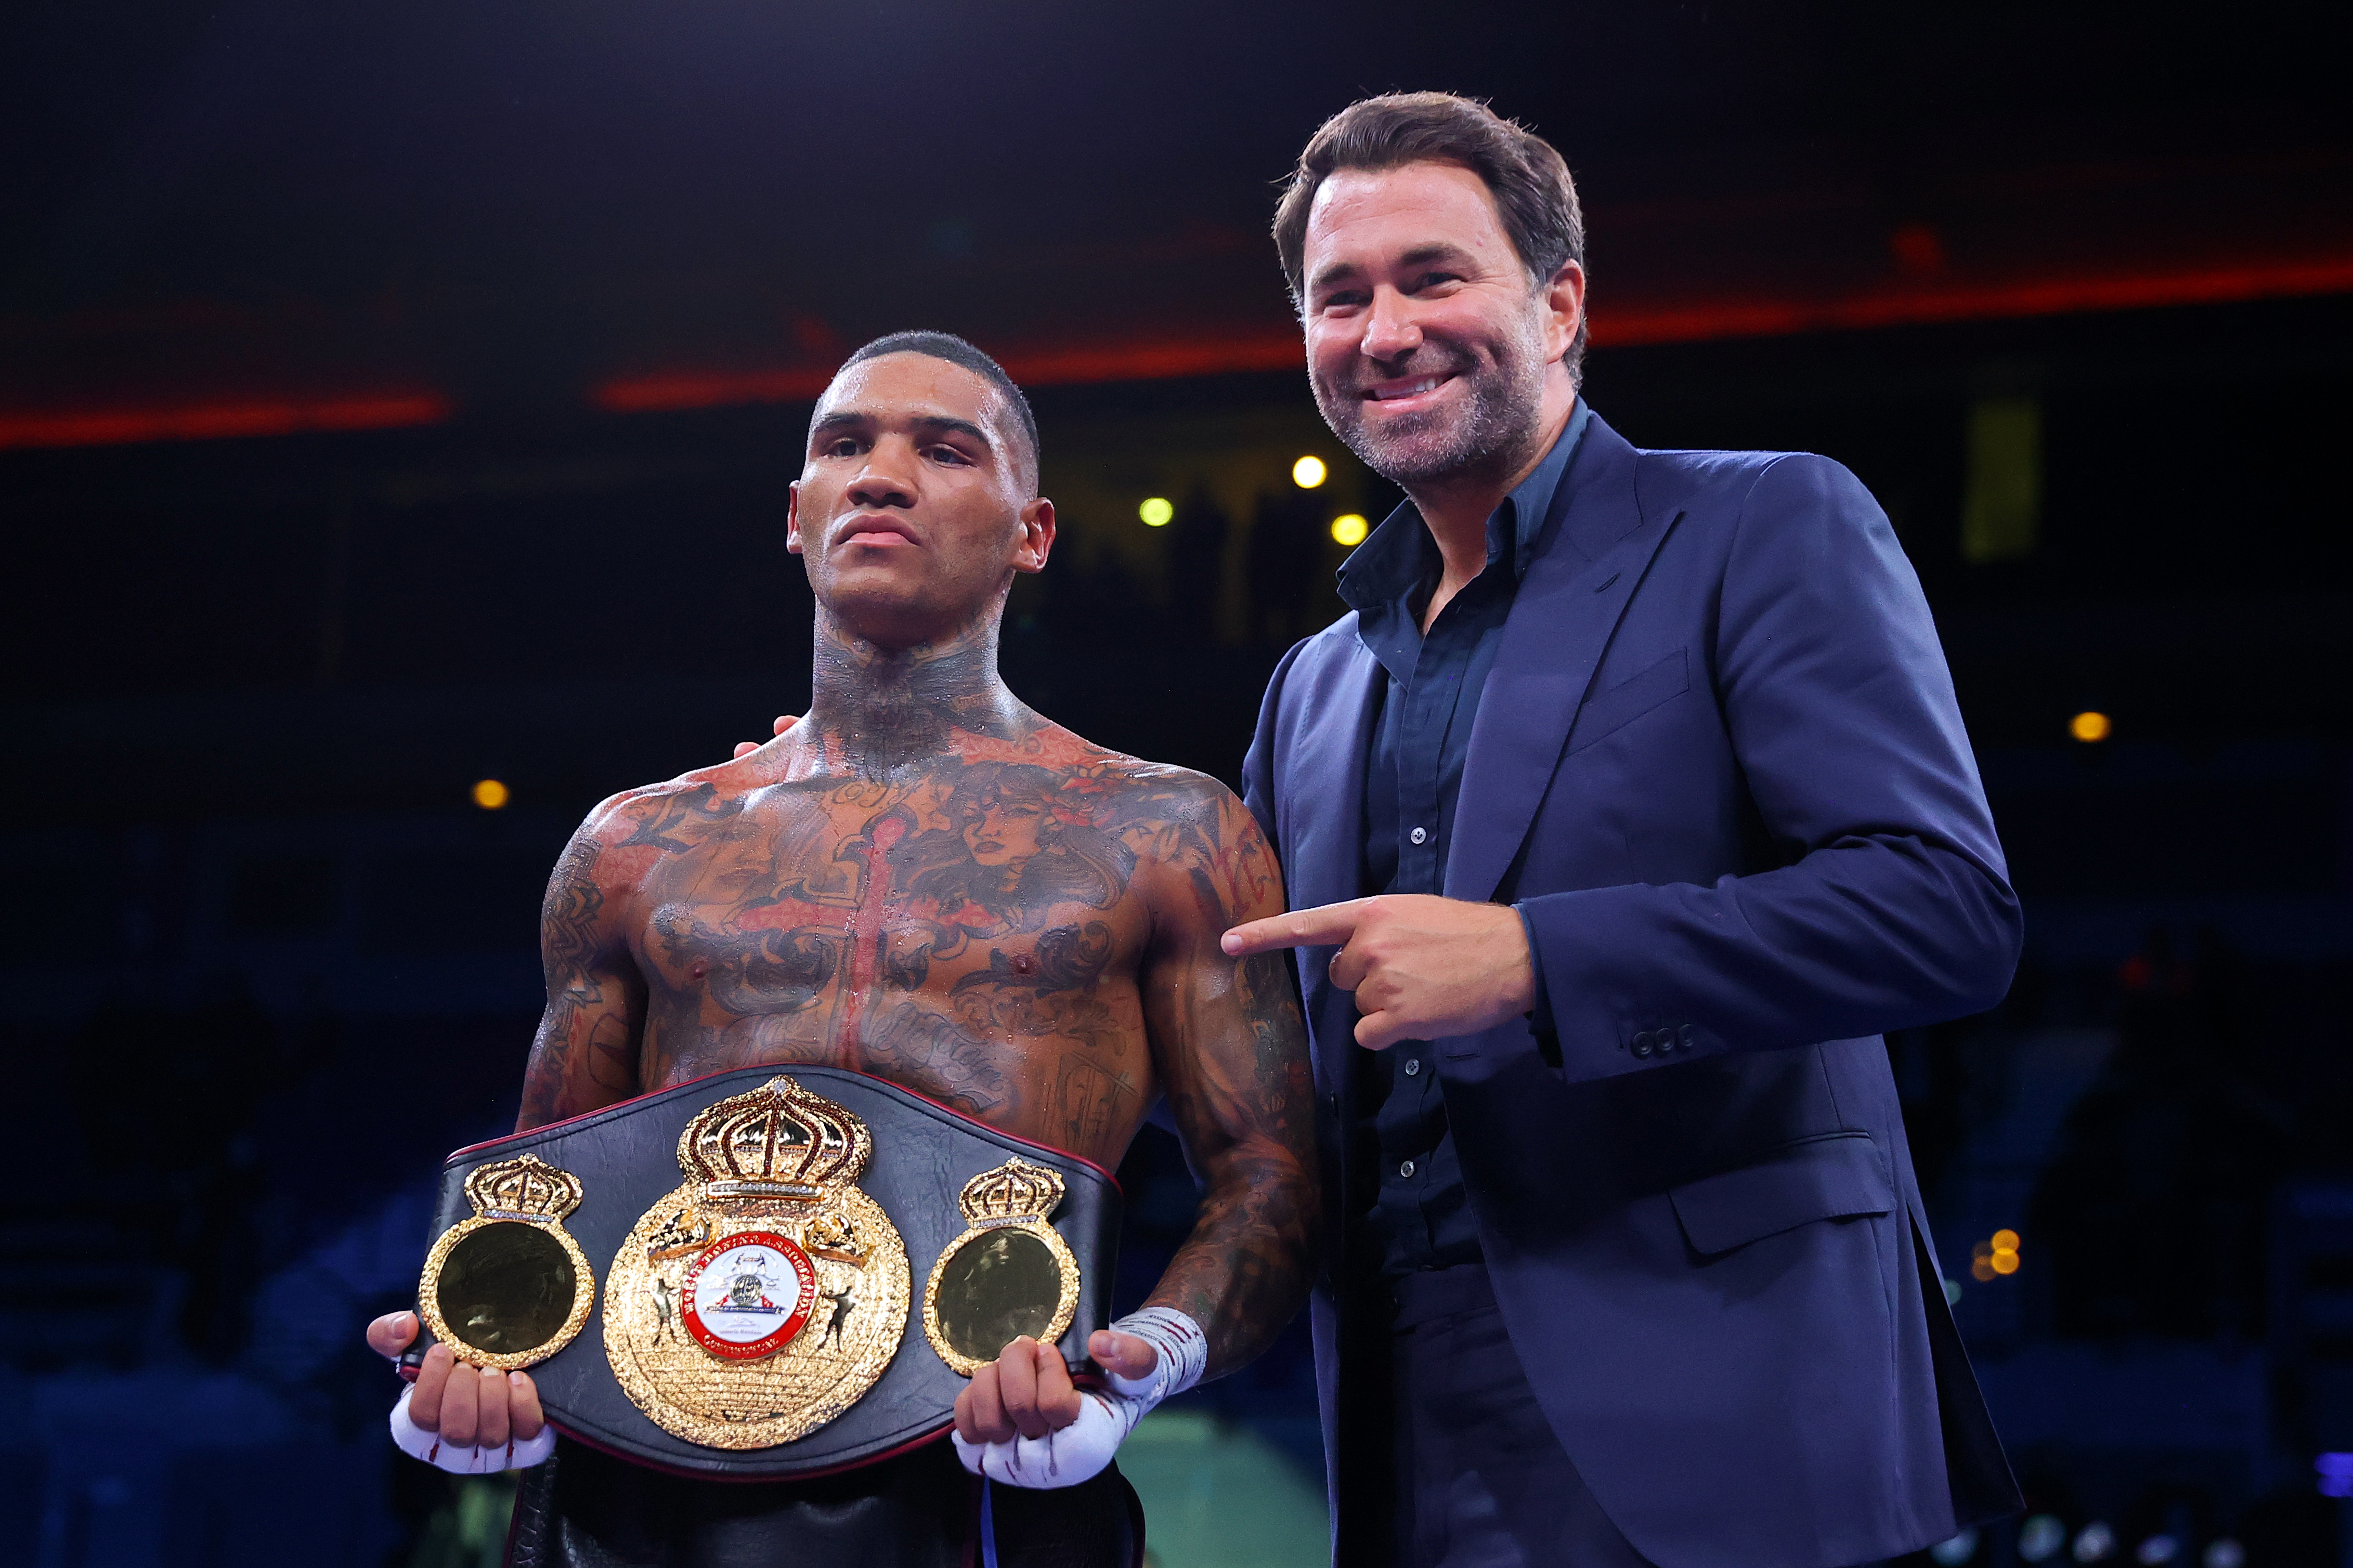 Eddie Hearn says Conor Benn has been cleared to fight and there should be no issues about it.